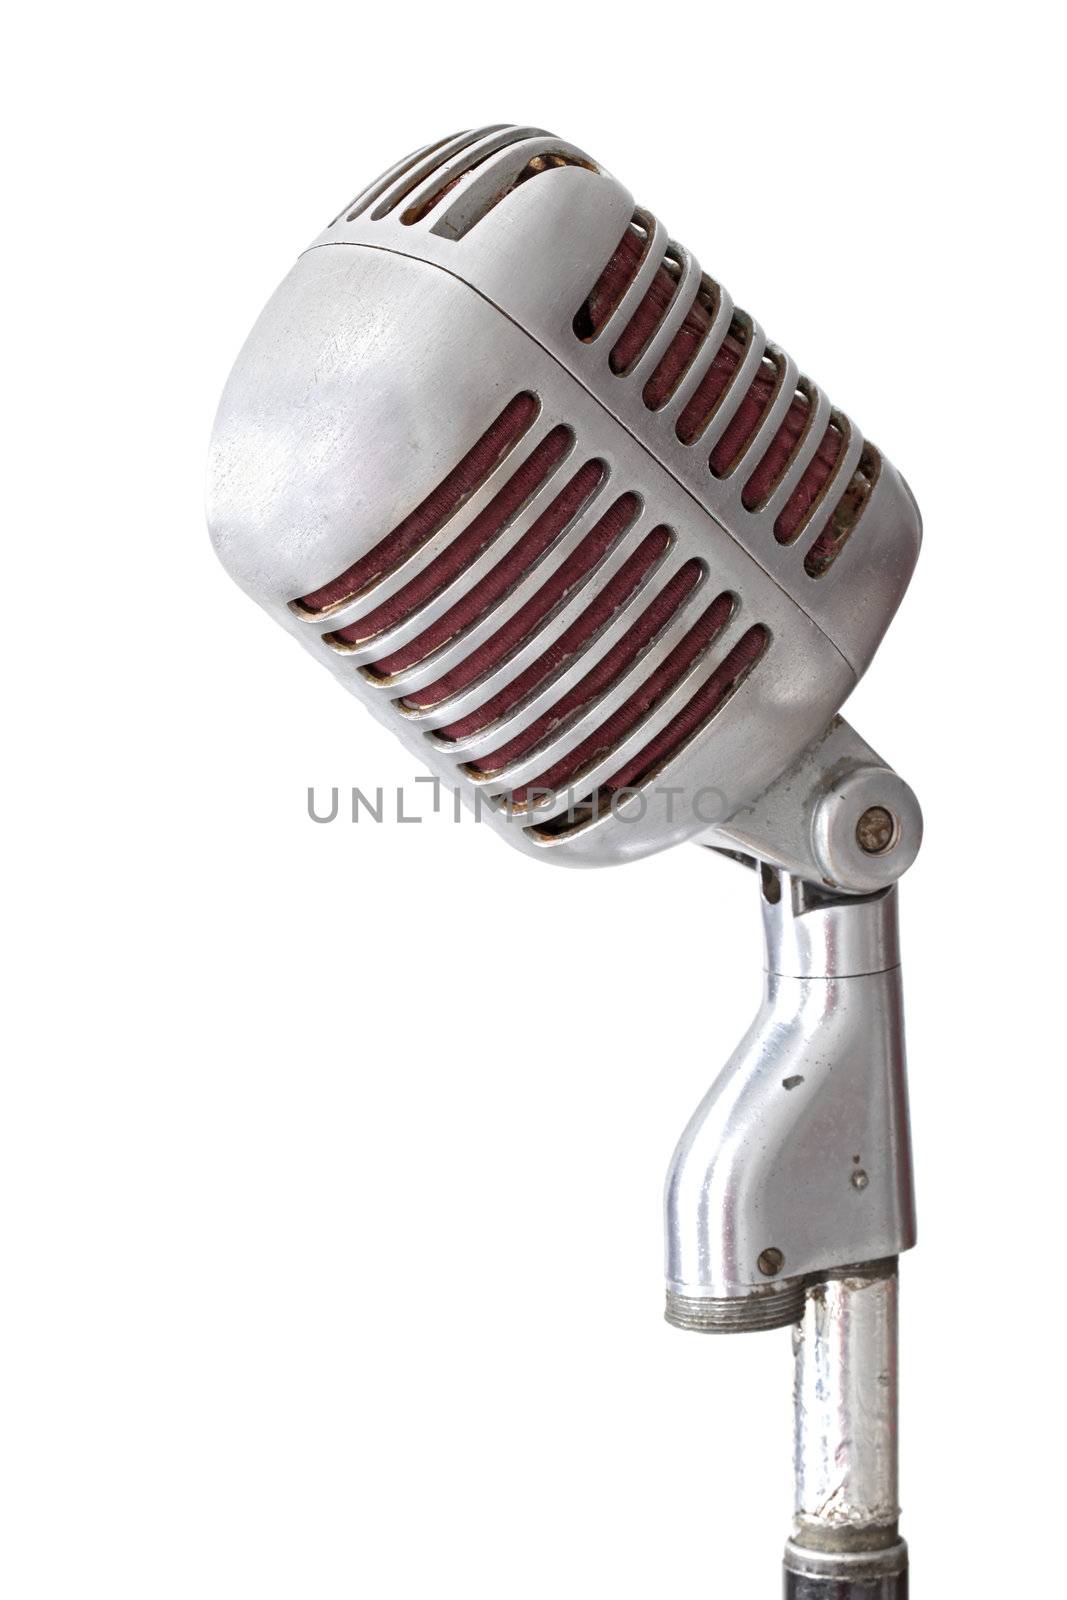 vintage microphone isolated on white